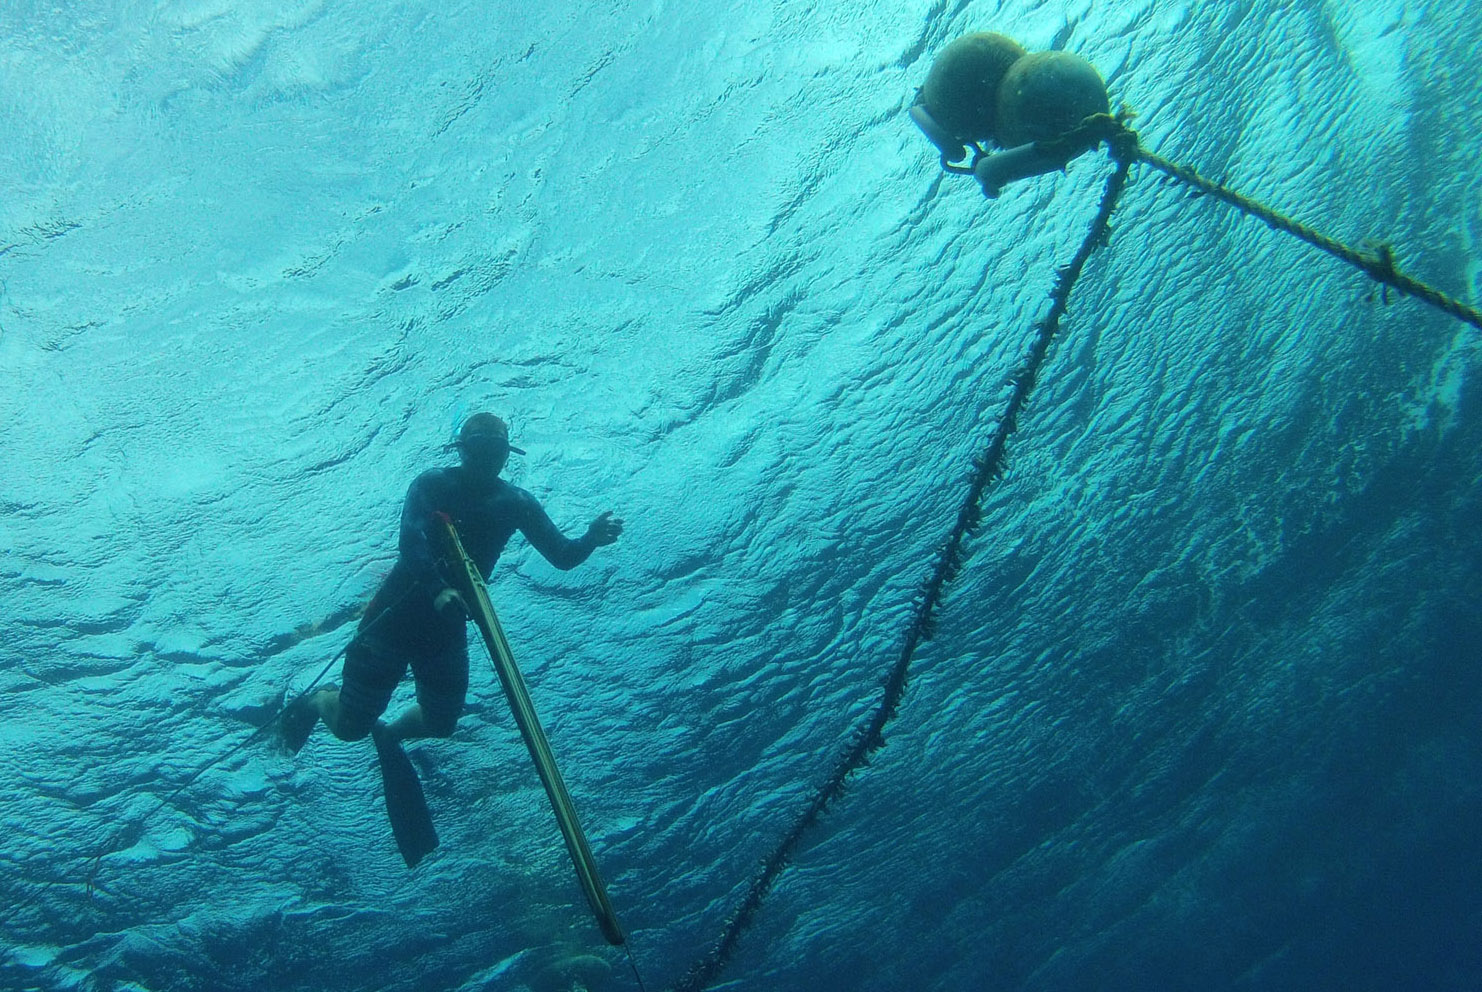 Interested in spearfishing? Check out these tips from a world